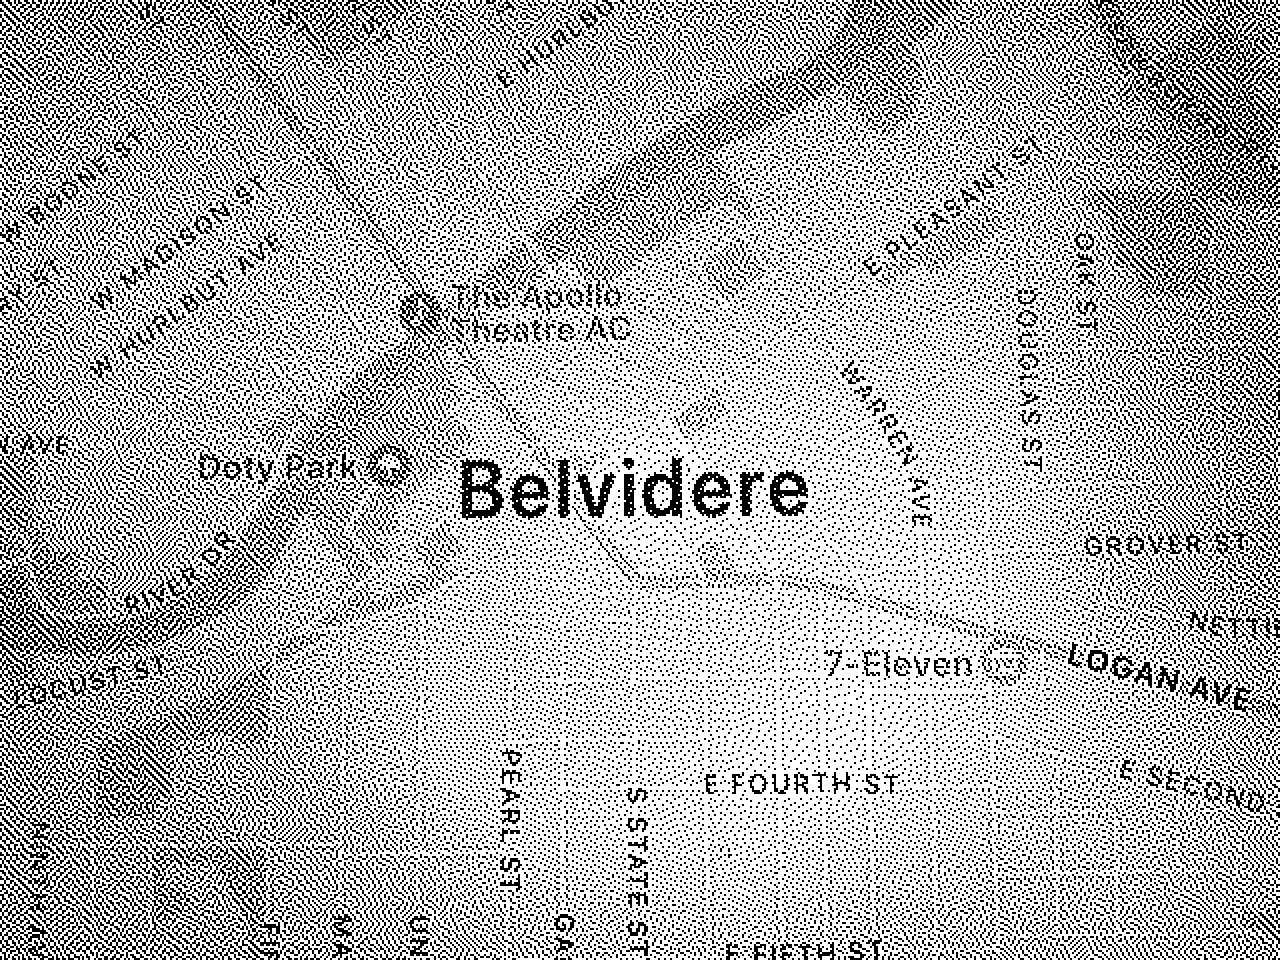 A map of Belvidere, IL